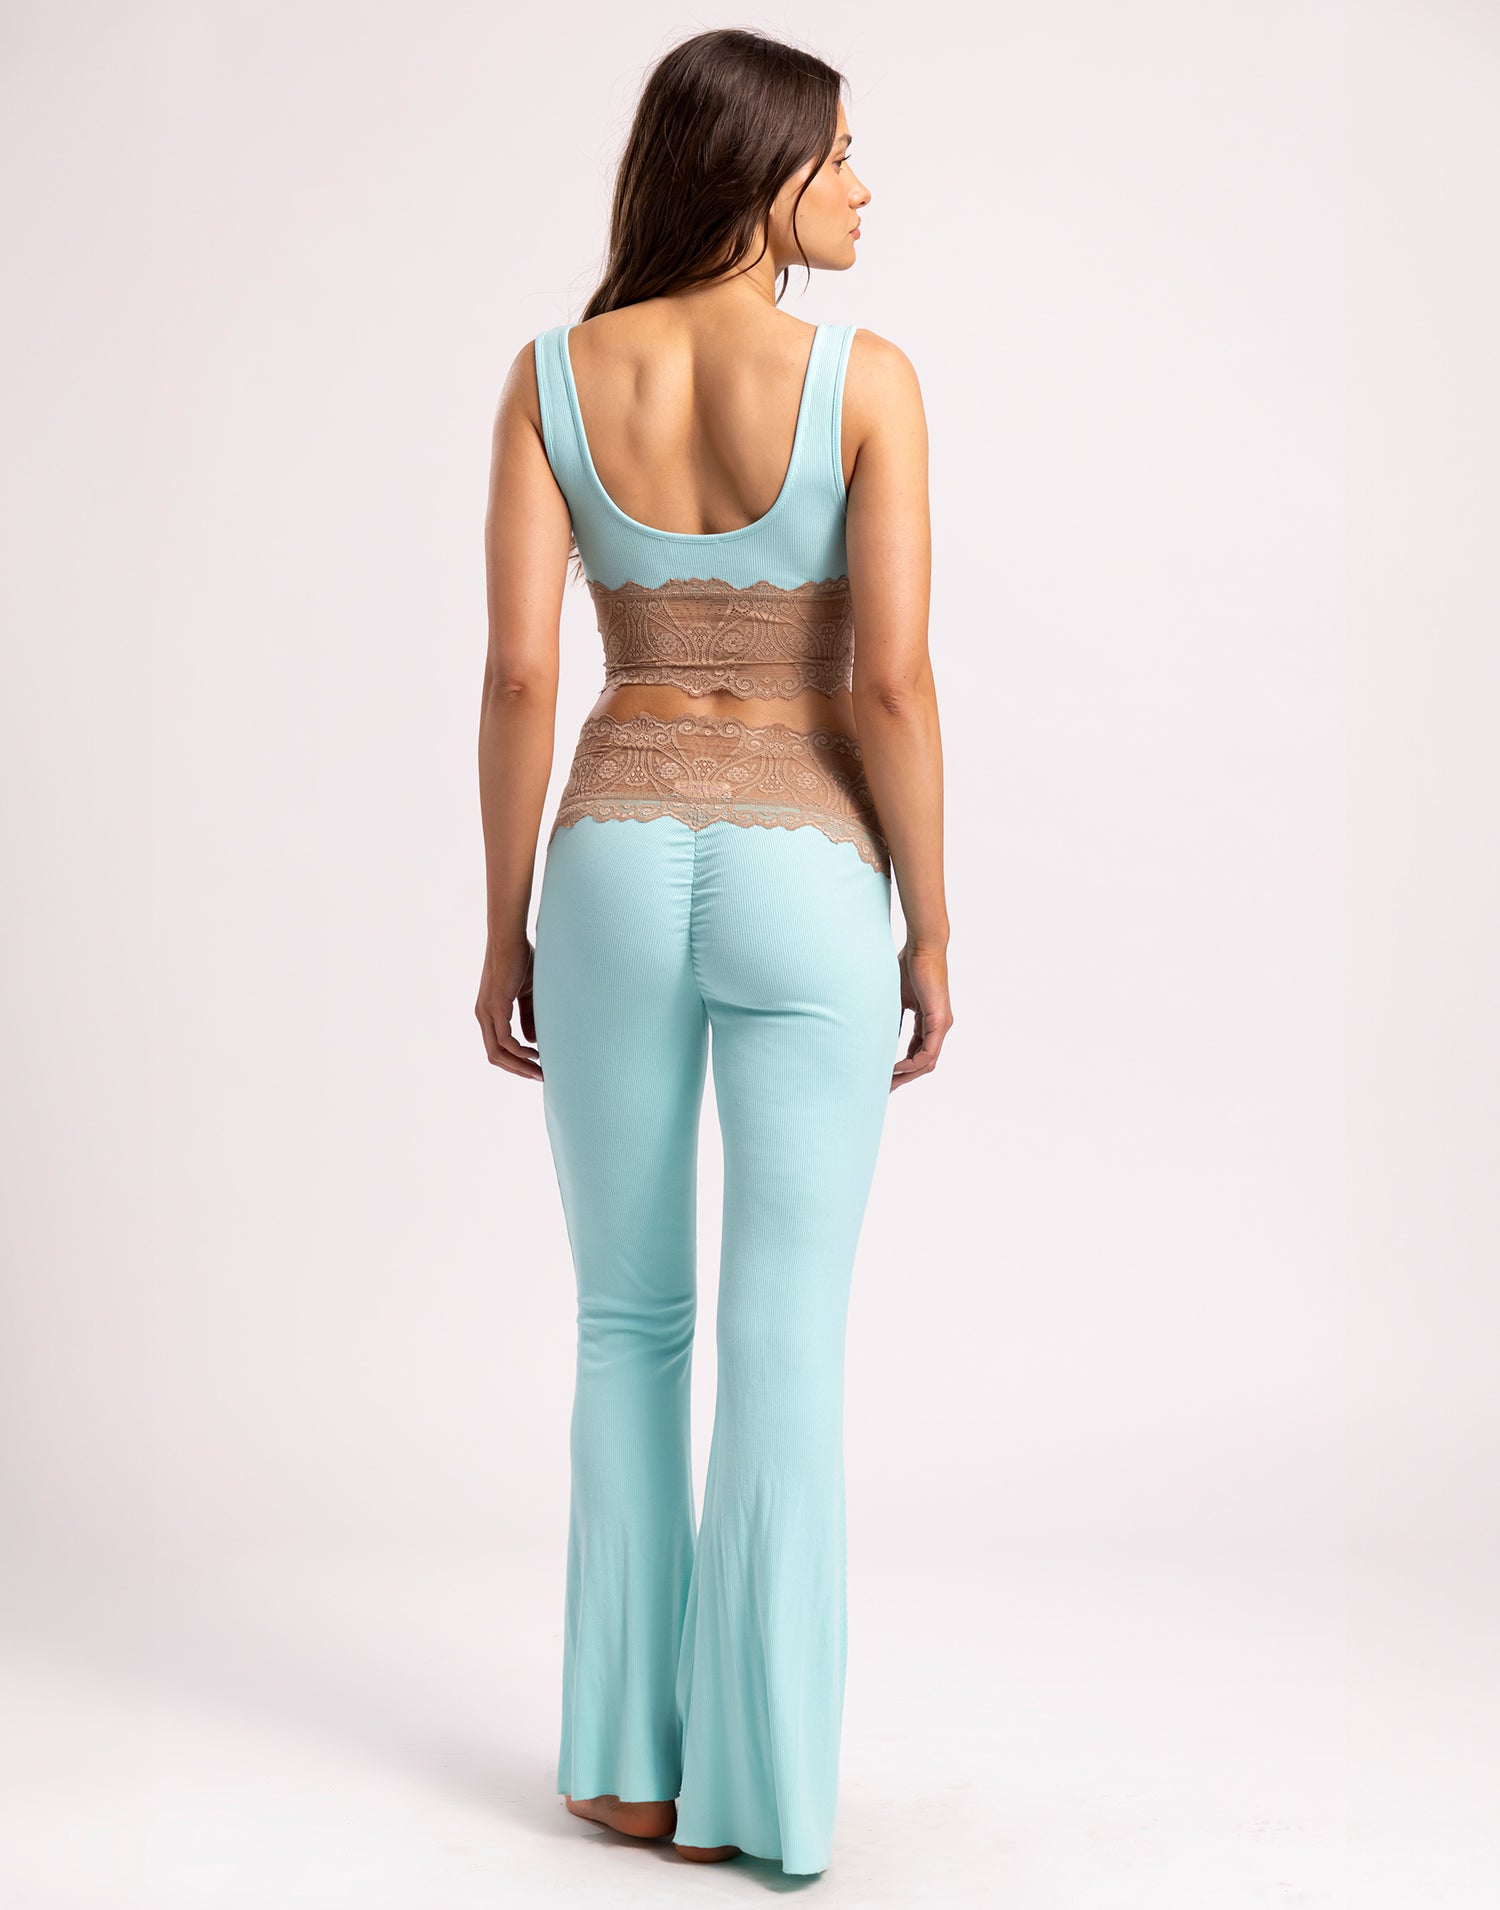 Anise Lounge Pant in Aqua with Delicate Lace Trim - Back View